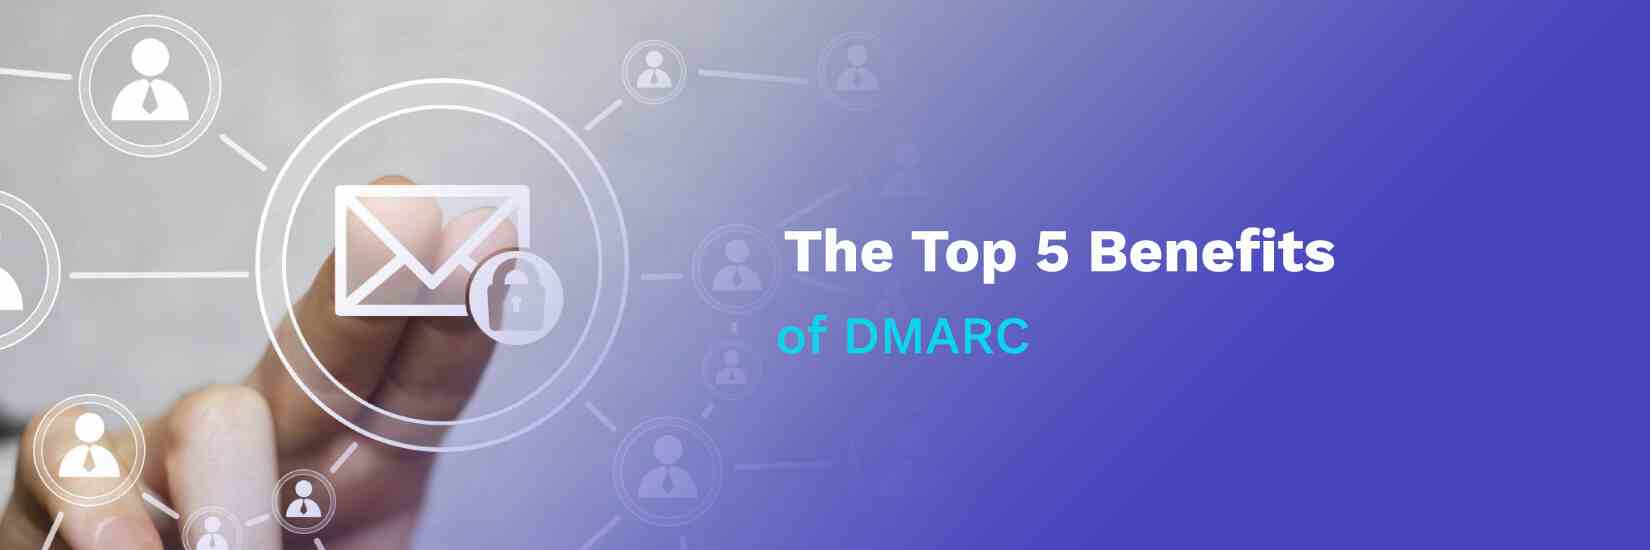 What is DMARC? The Top 5 Benefits of DMARC!